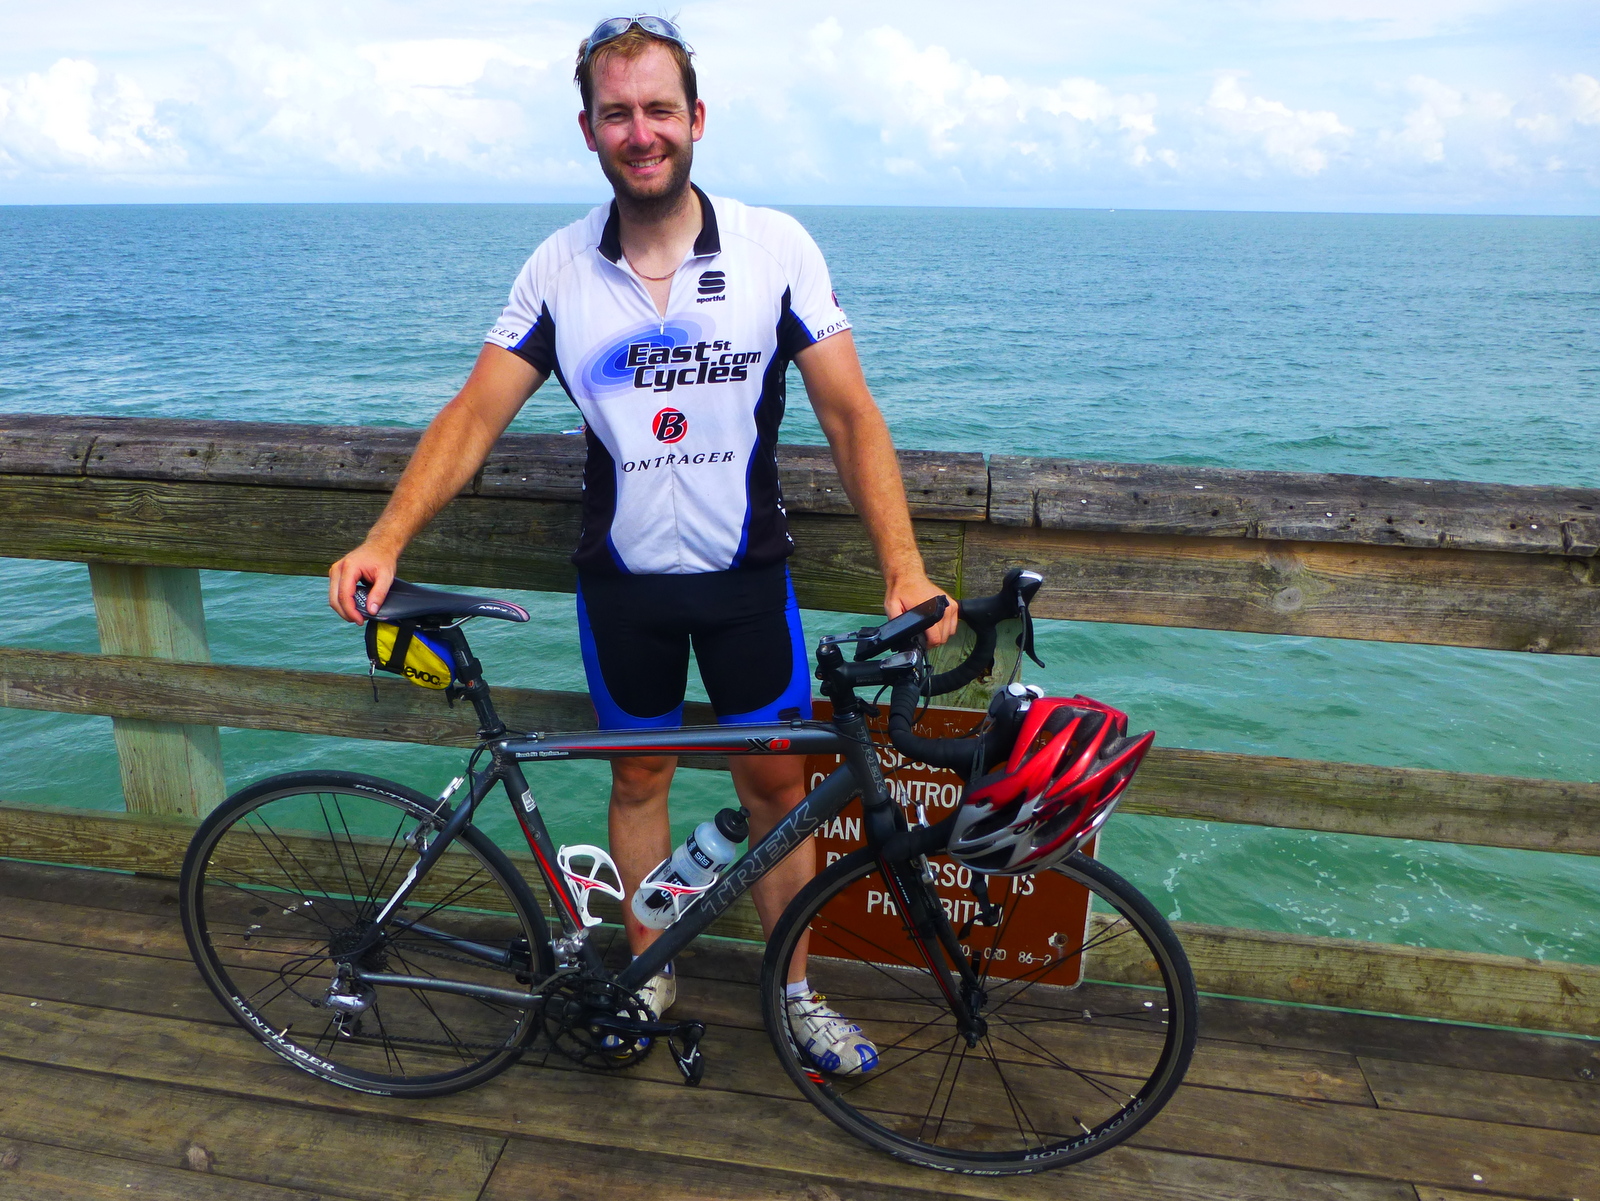 Motorcycle rider completes ultimate triathlon after accident